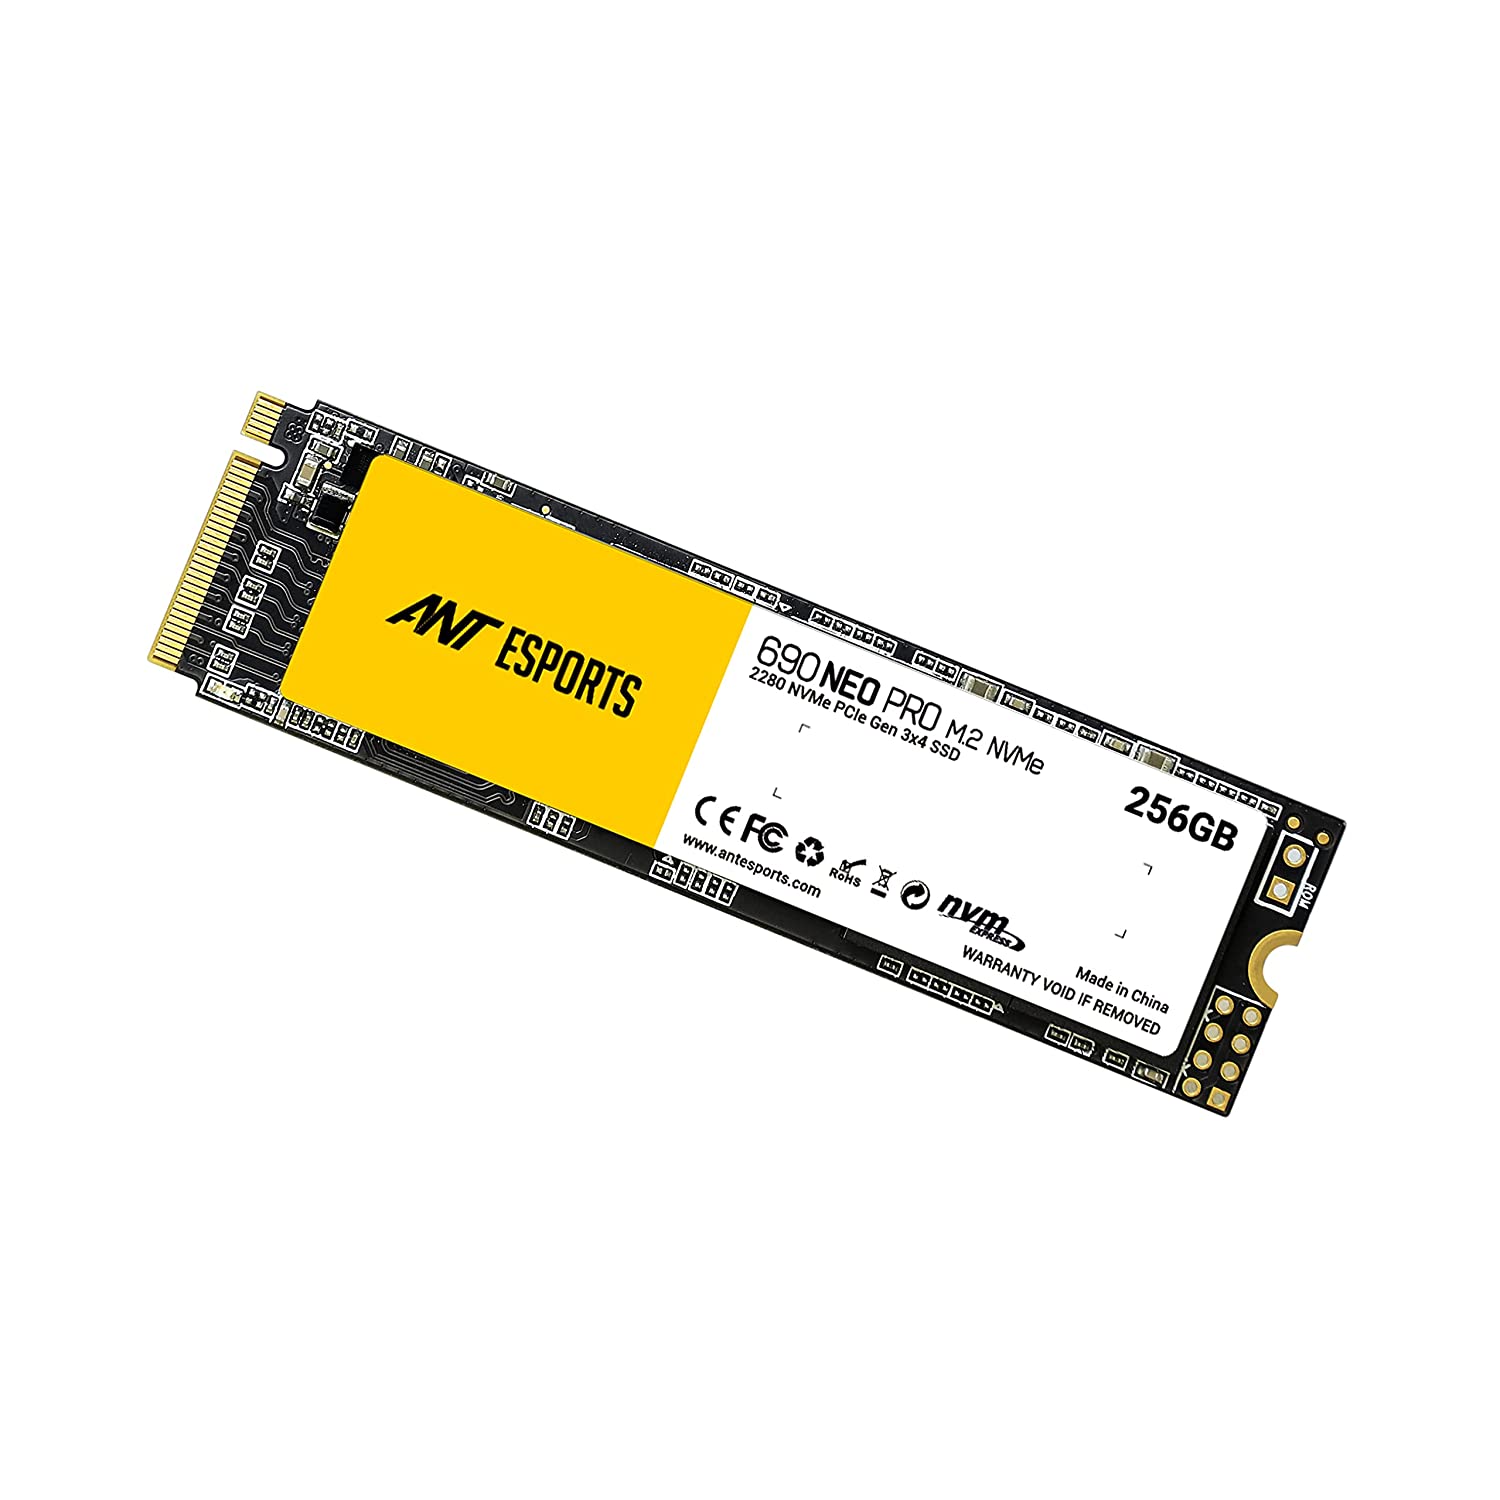 ANT Esports 690 Neo Pro M.2 NVMe 256GB SSD,Speed Upto 1800MB/s of Read, 1100MB/s of Write